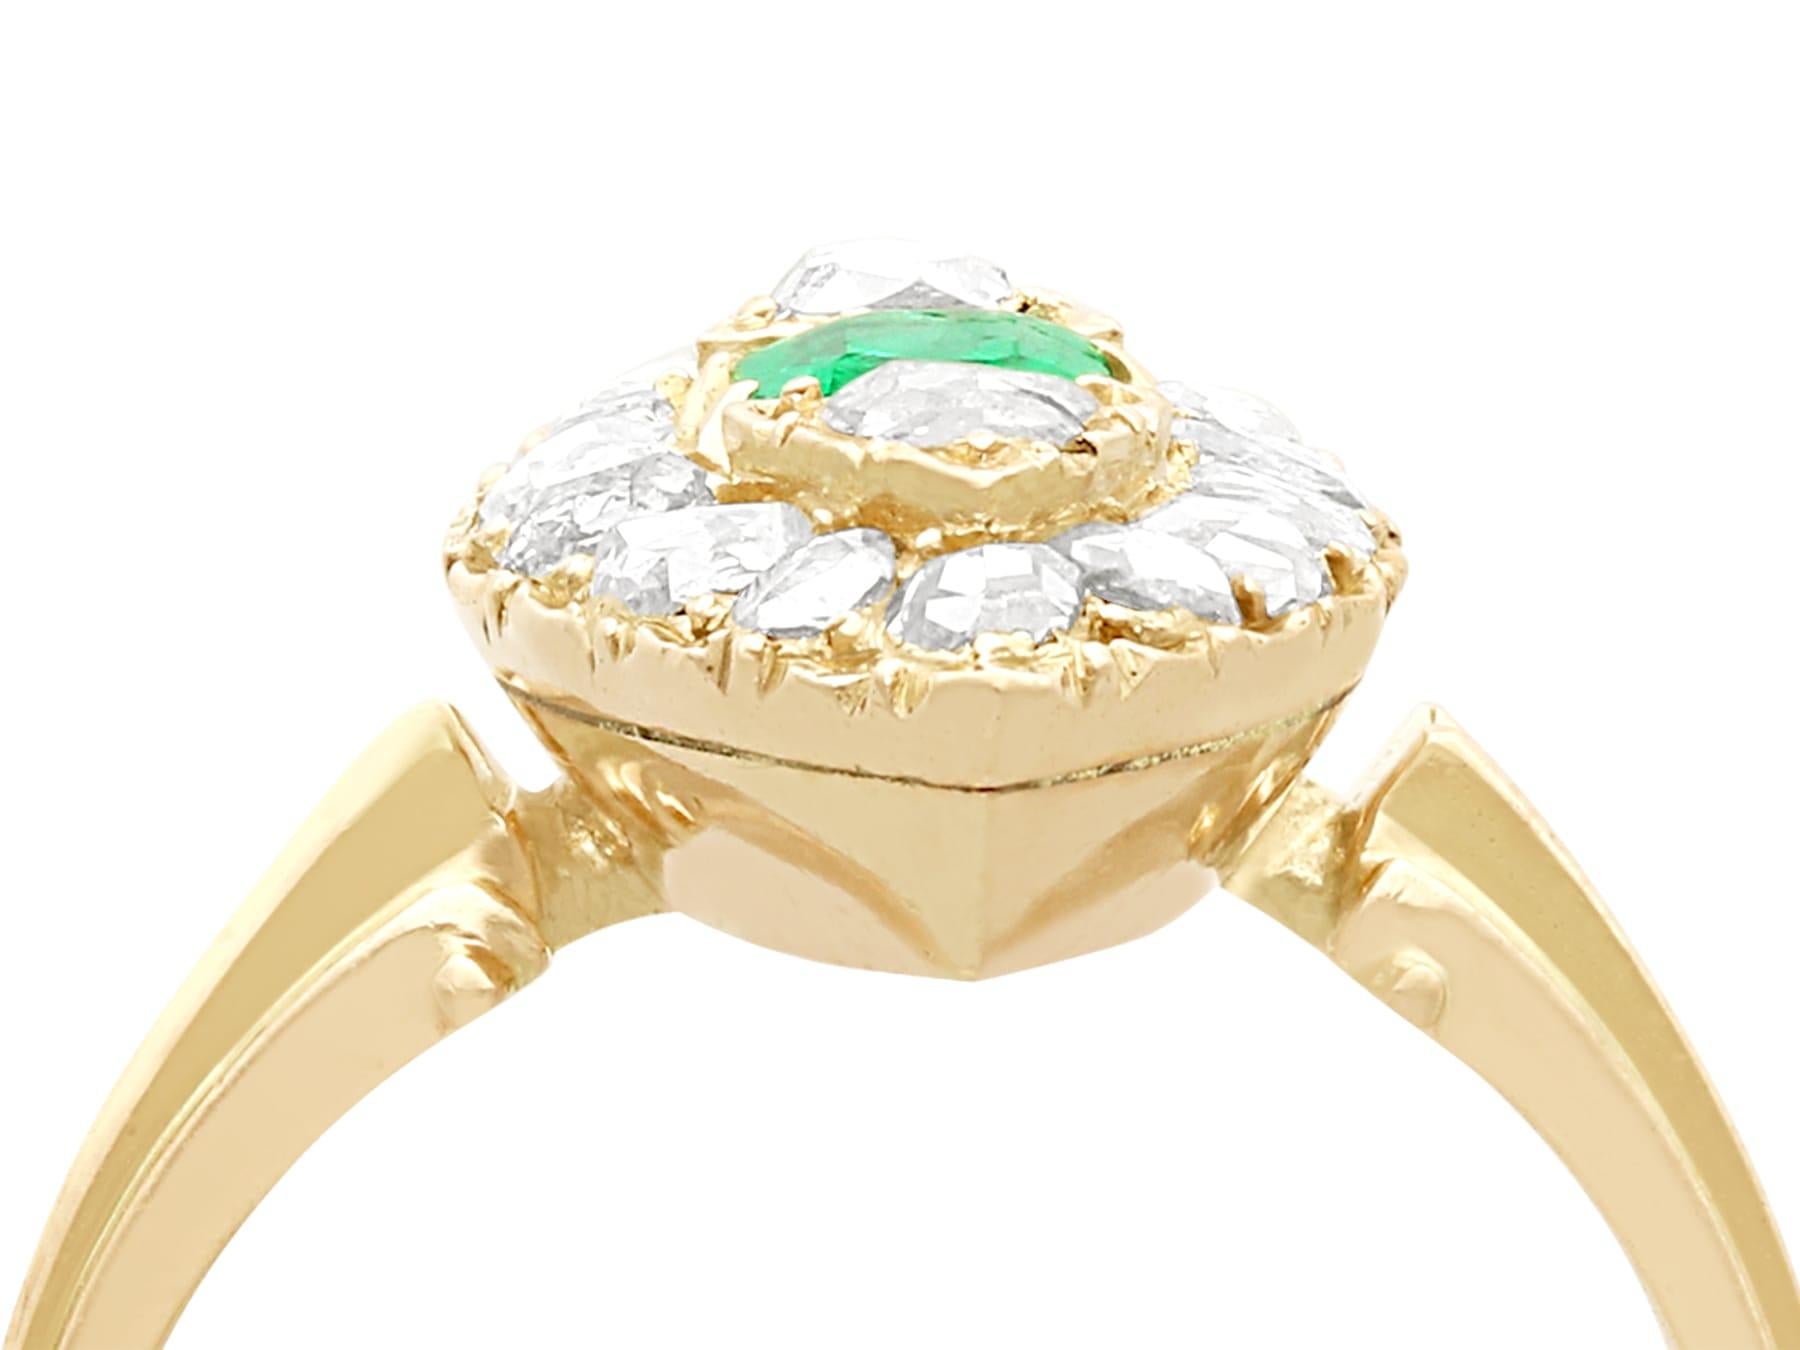 An exceptional antique 0.42 Ct emerald and 1.78 Ct diamond, 9k yellow gold marquise ring; part of our diverse antique Victorian jewelry collections.

This exceptional, fine and impressive marquise shaped emerald cut emerald and diamond ring has been